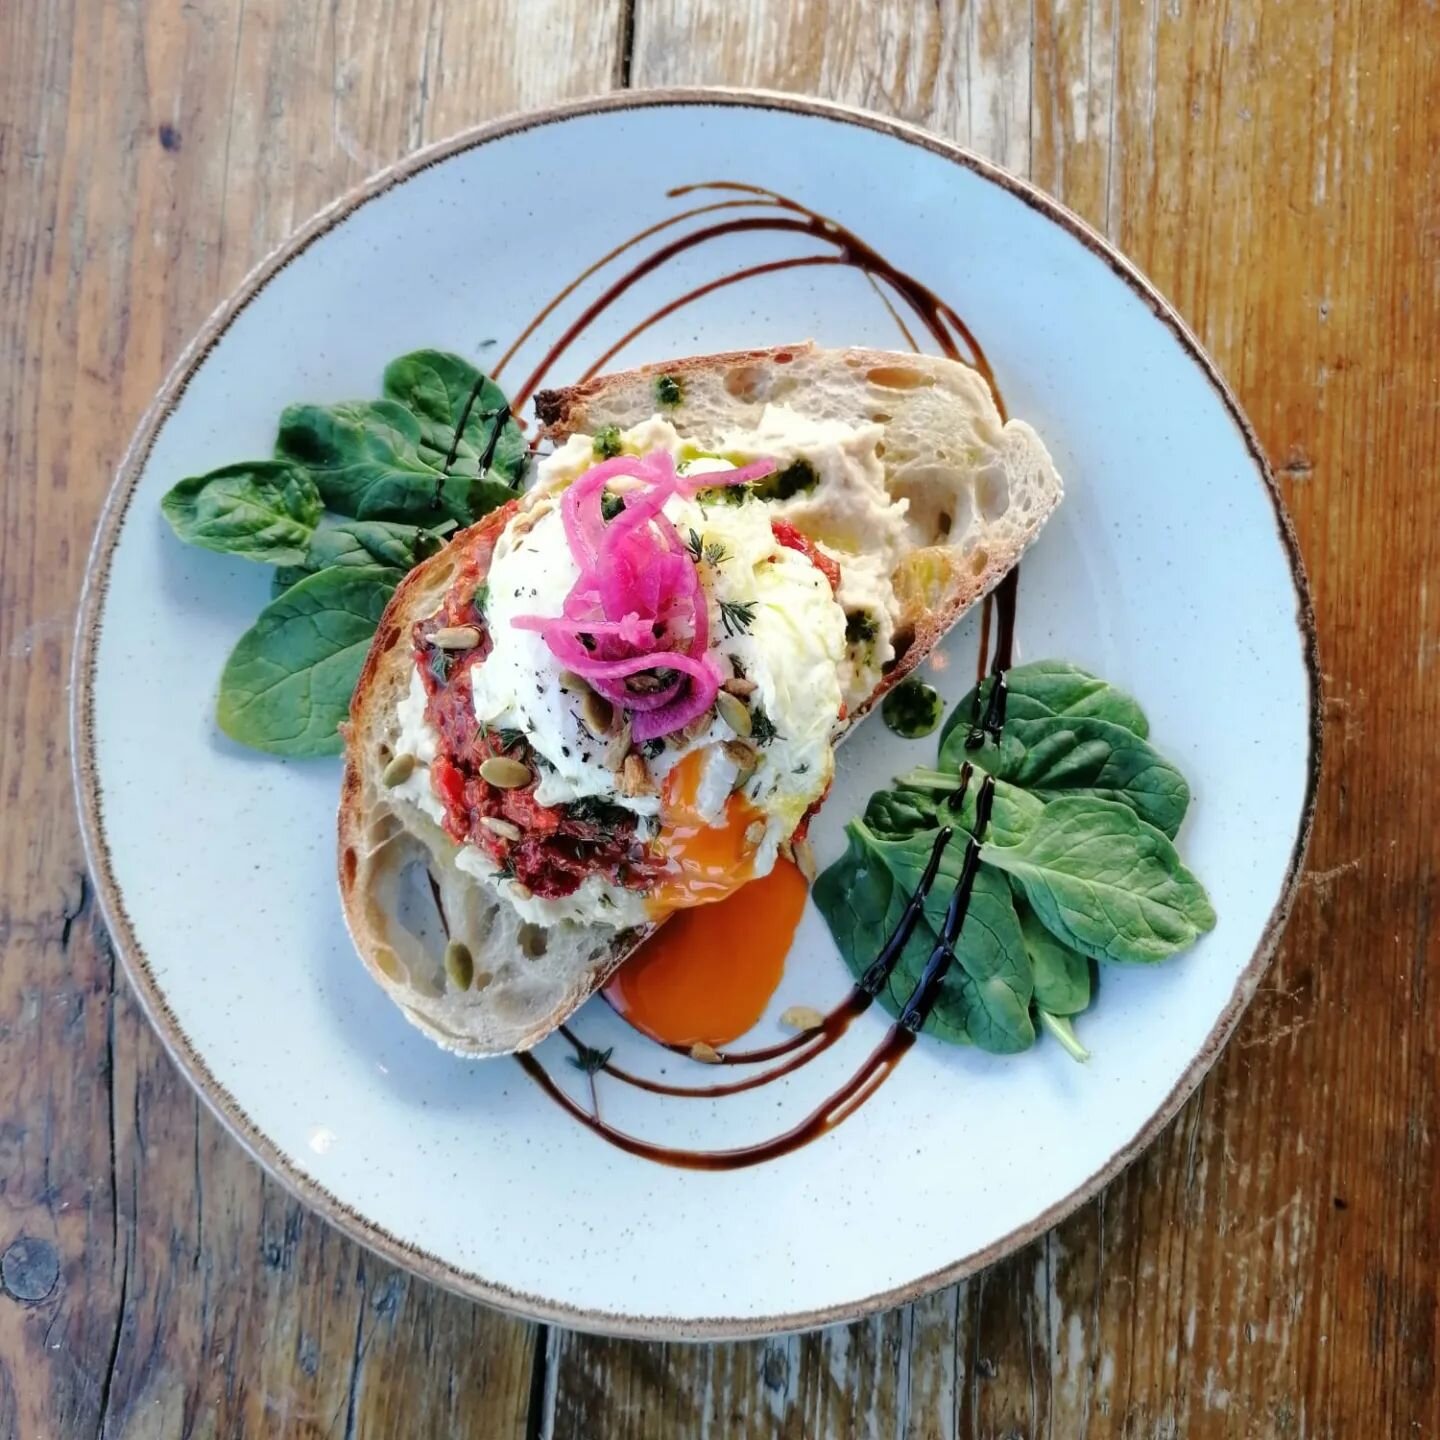 Feast for Peace Special Breakfast

Here's our Muhammara and Butterbean mash breakfast special. A layer of creamy Butterbean mash, Muhammara (spiced and smoky red pepper  and walnut sauce), a mumbled egg, served with thyme and garlic oil, toasted seed